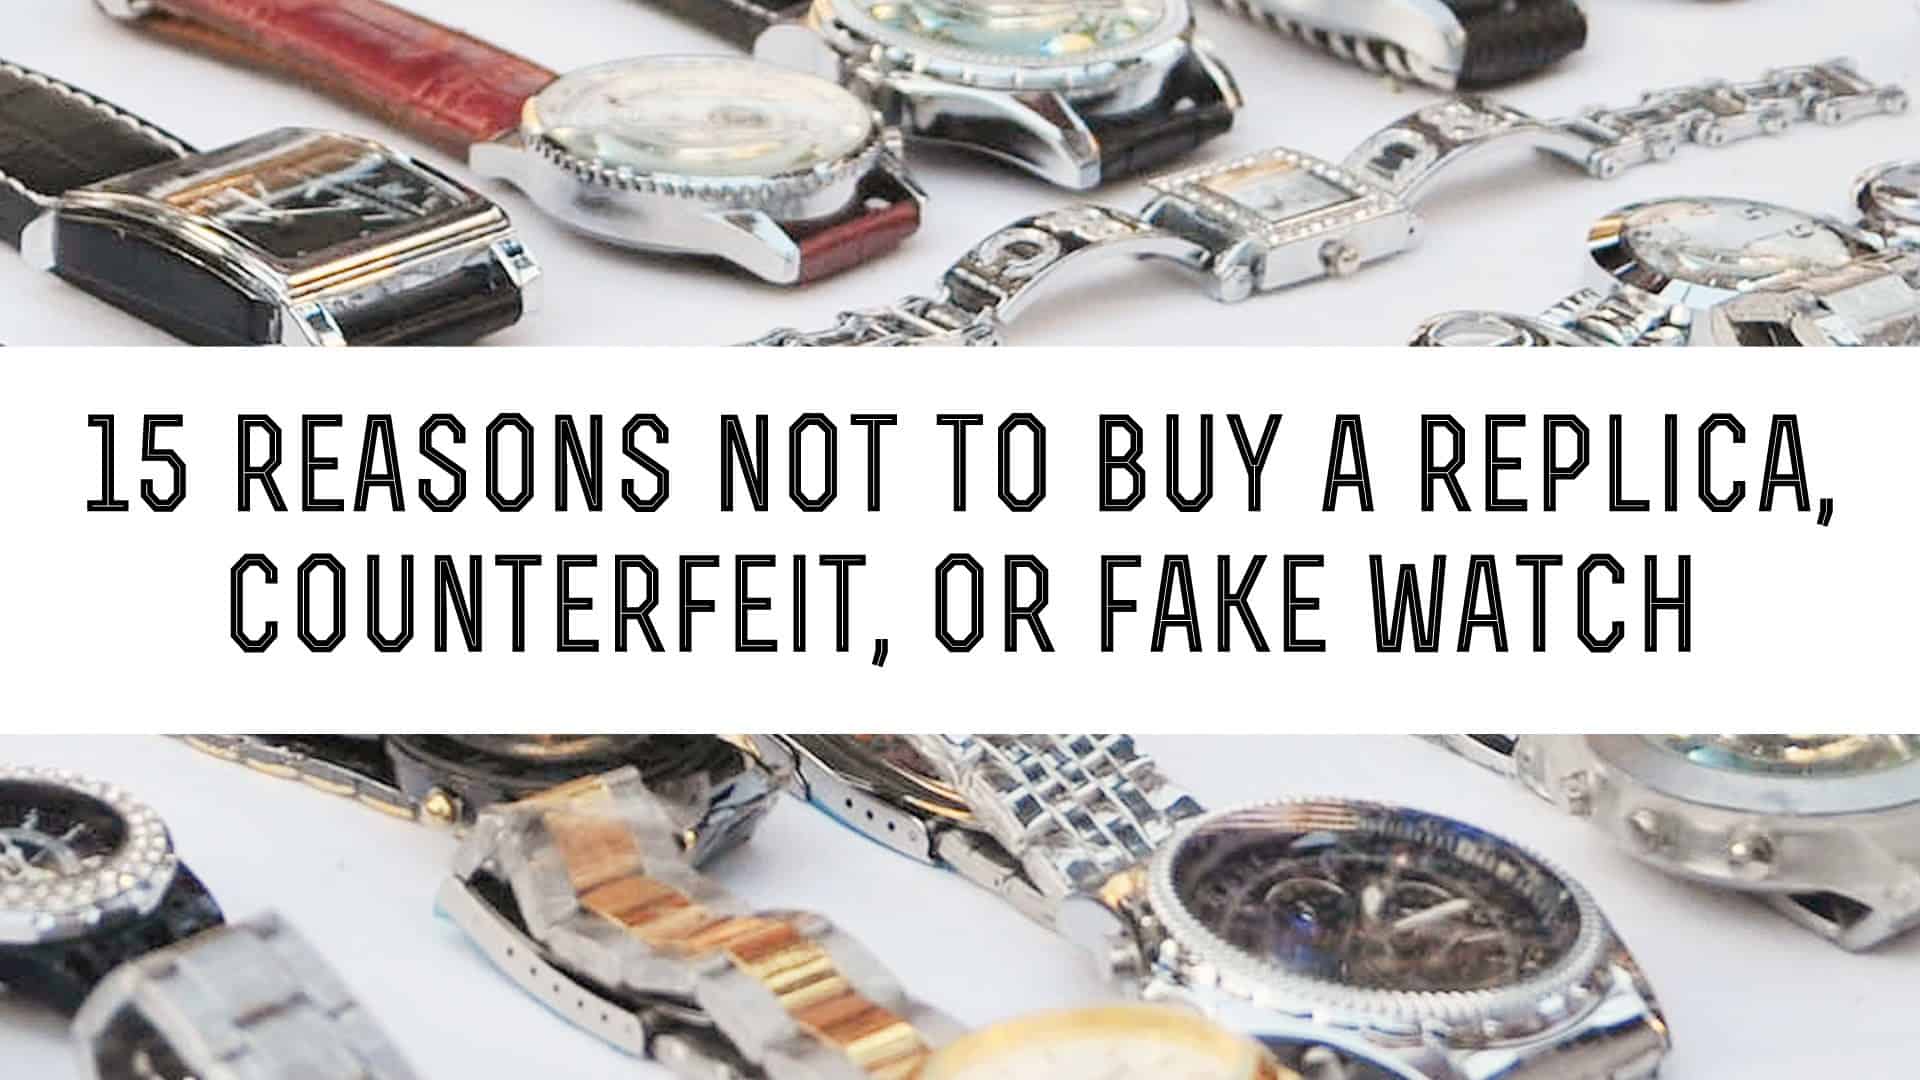 15 Reasons Not To Buy a Replica Counterfeit or Fake Watch